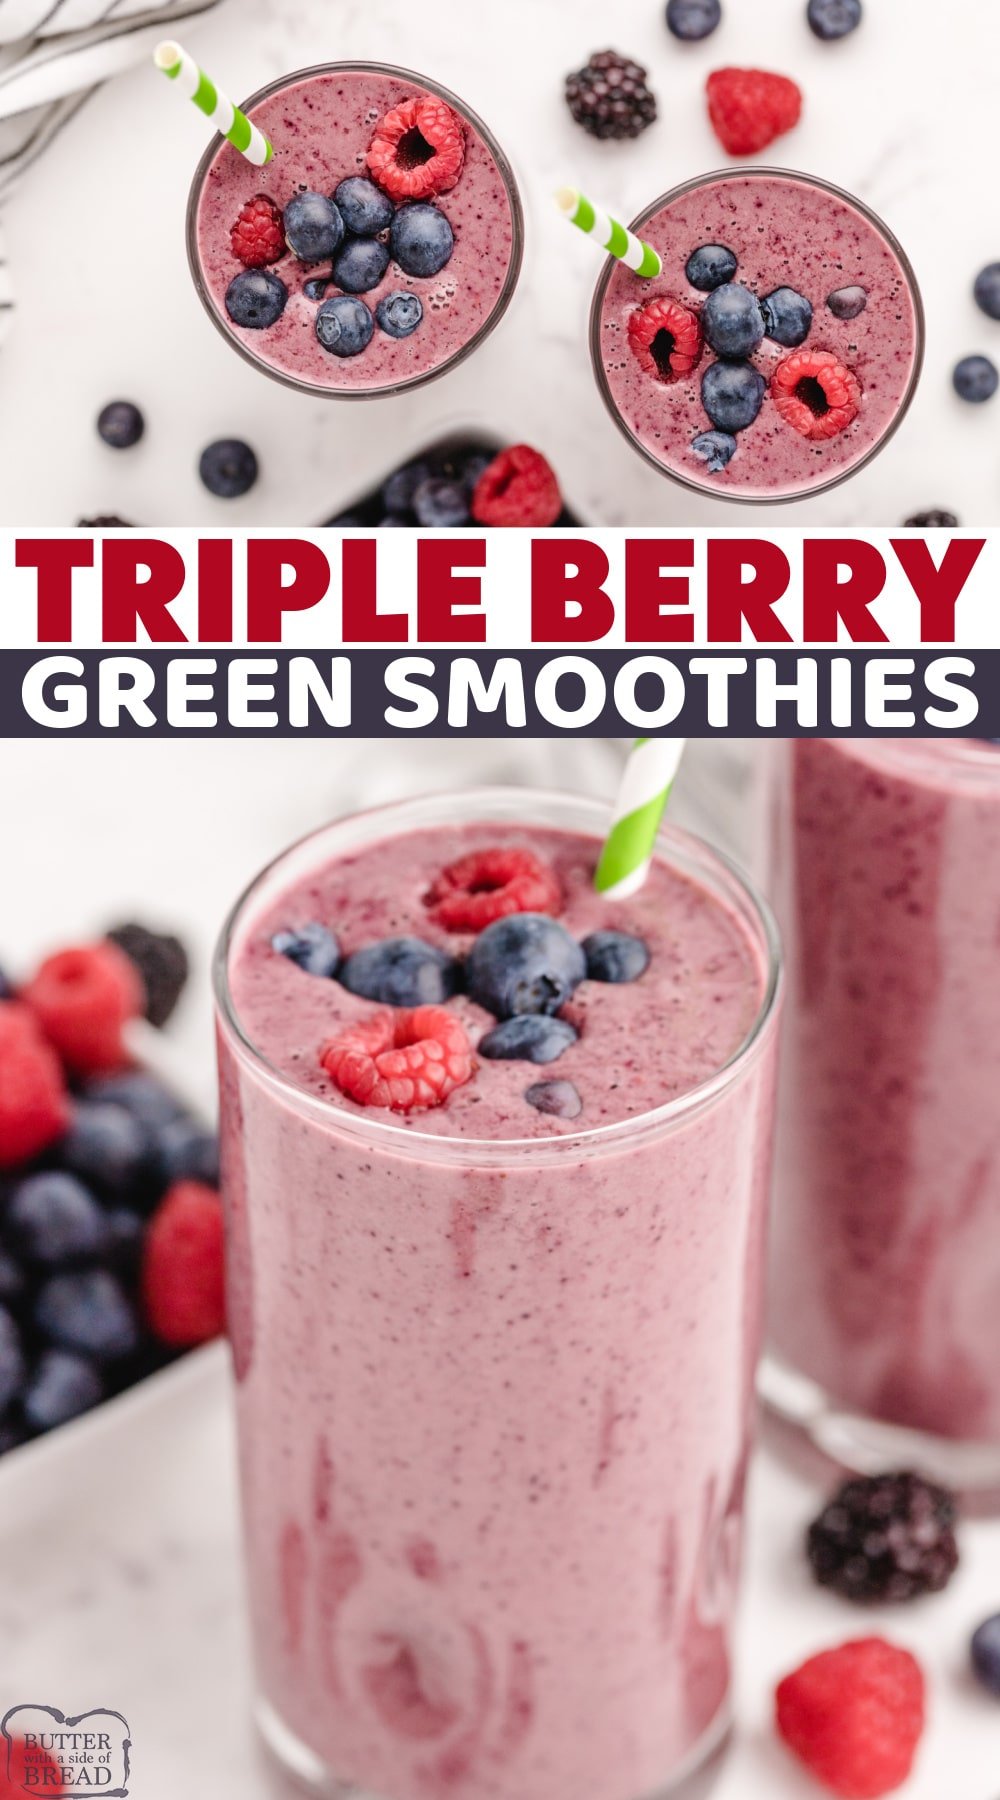 Triple Berry Green Smoothies made with 4 ingredients in less than 2 minutes. Easy smoothie recipe that is so pretty and purple, no one will ever know there is spinach in there!